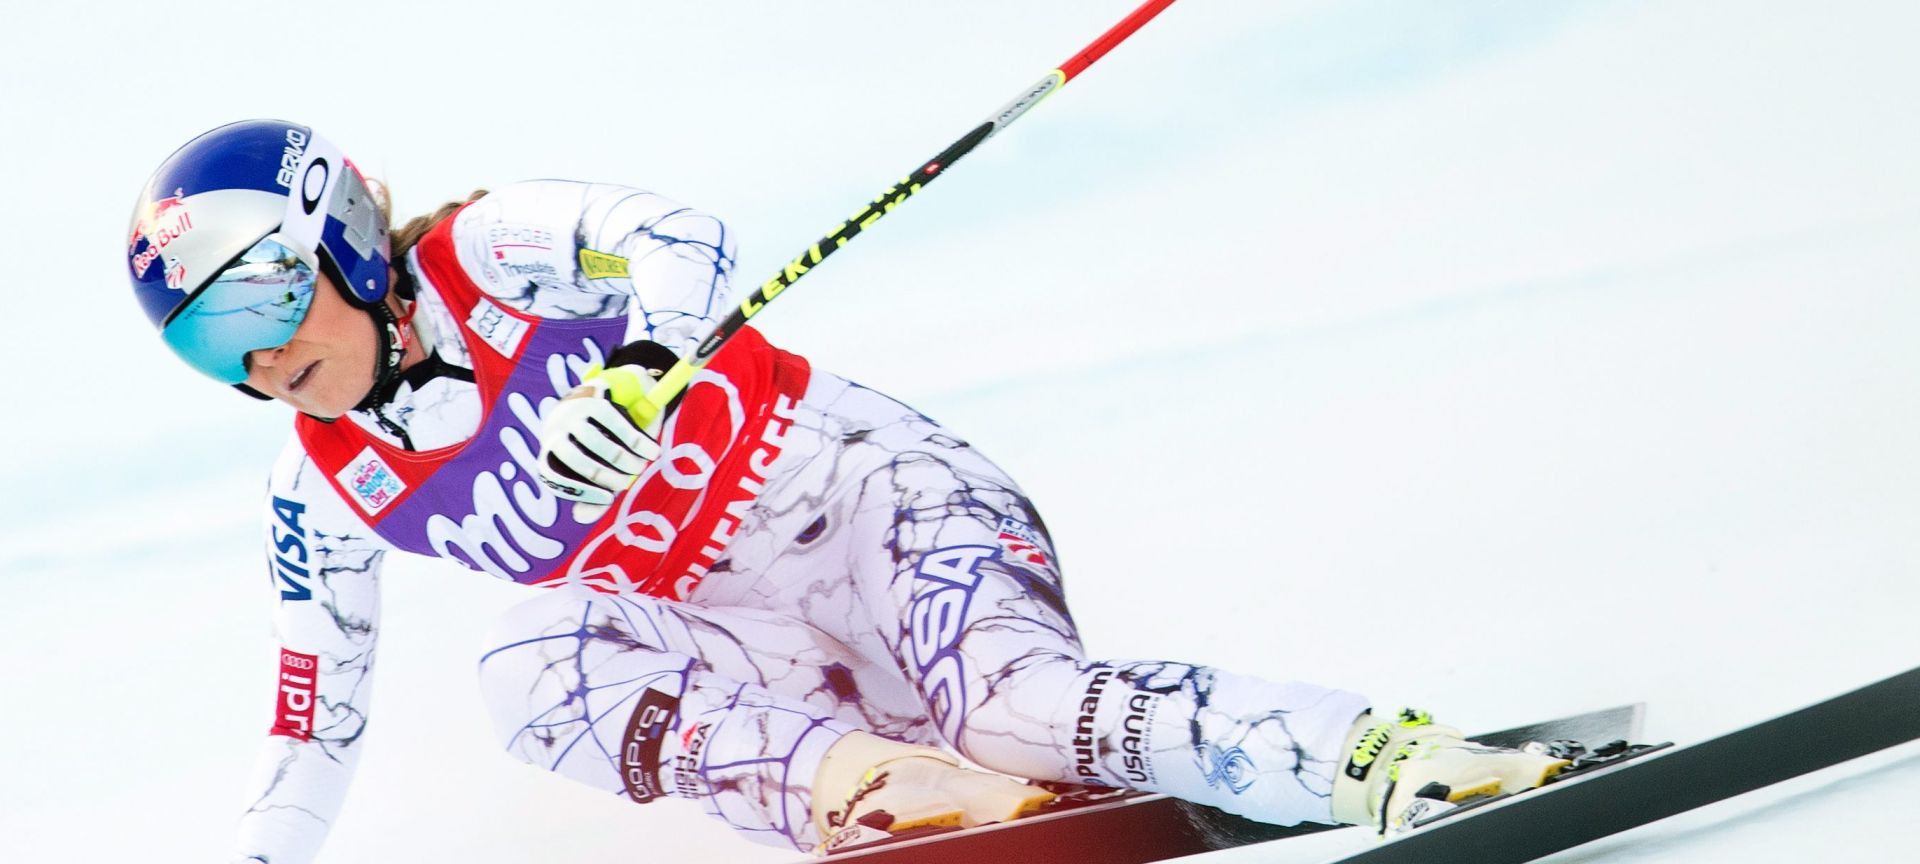 epa05093639 Lindsey Vonn of the USA competes in the women's Alpine Skiing World Cup downhill race in Zauchensee, Austria, 09 January 2016.  EPA/EXPA/JOHANN GRODER